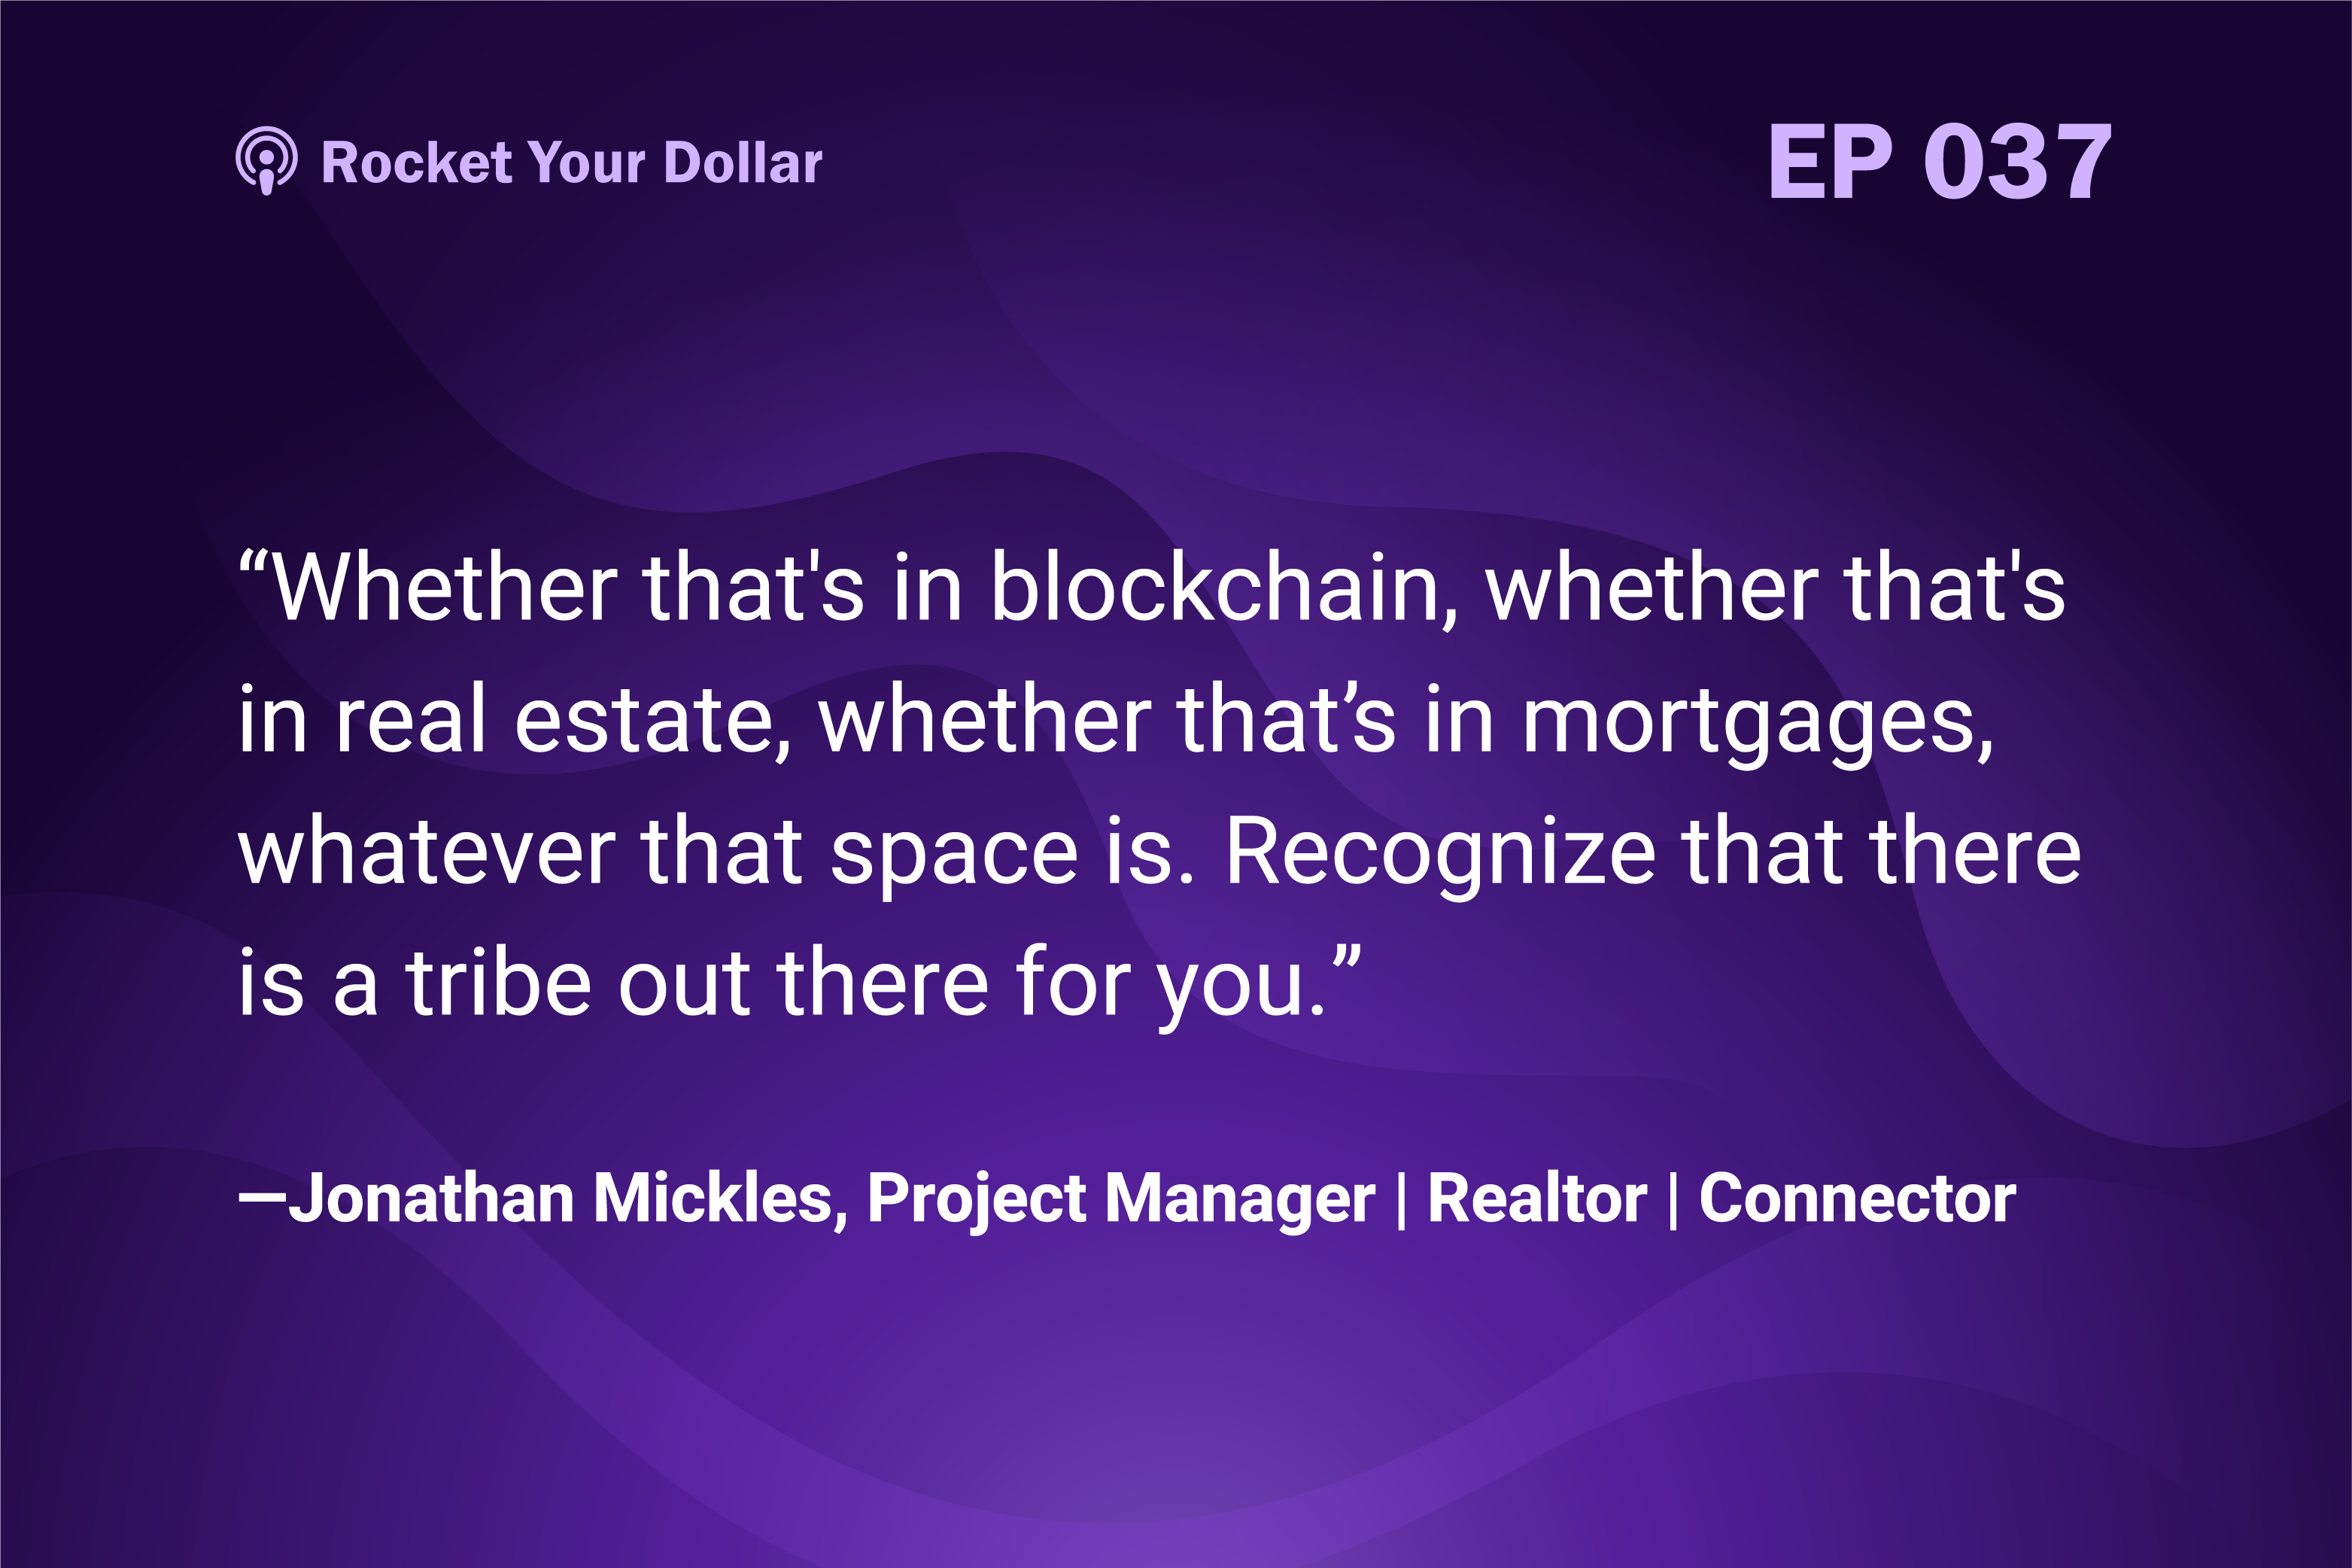 “Whether that's in blockchain, whether that's in real estate, whether that's in mortgages, whatever that space is. Recognize that there is a tribe out there for you.” — Jonathan Mickles